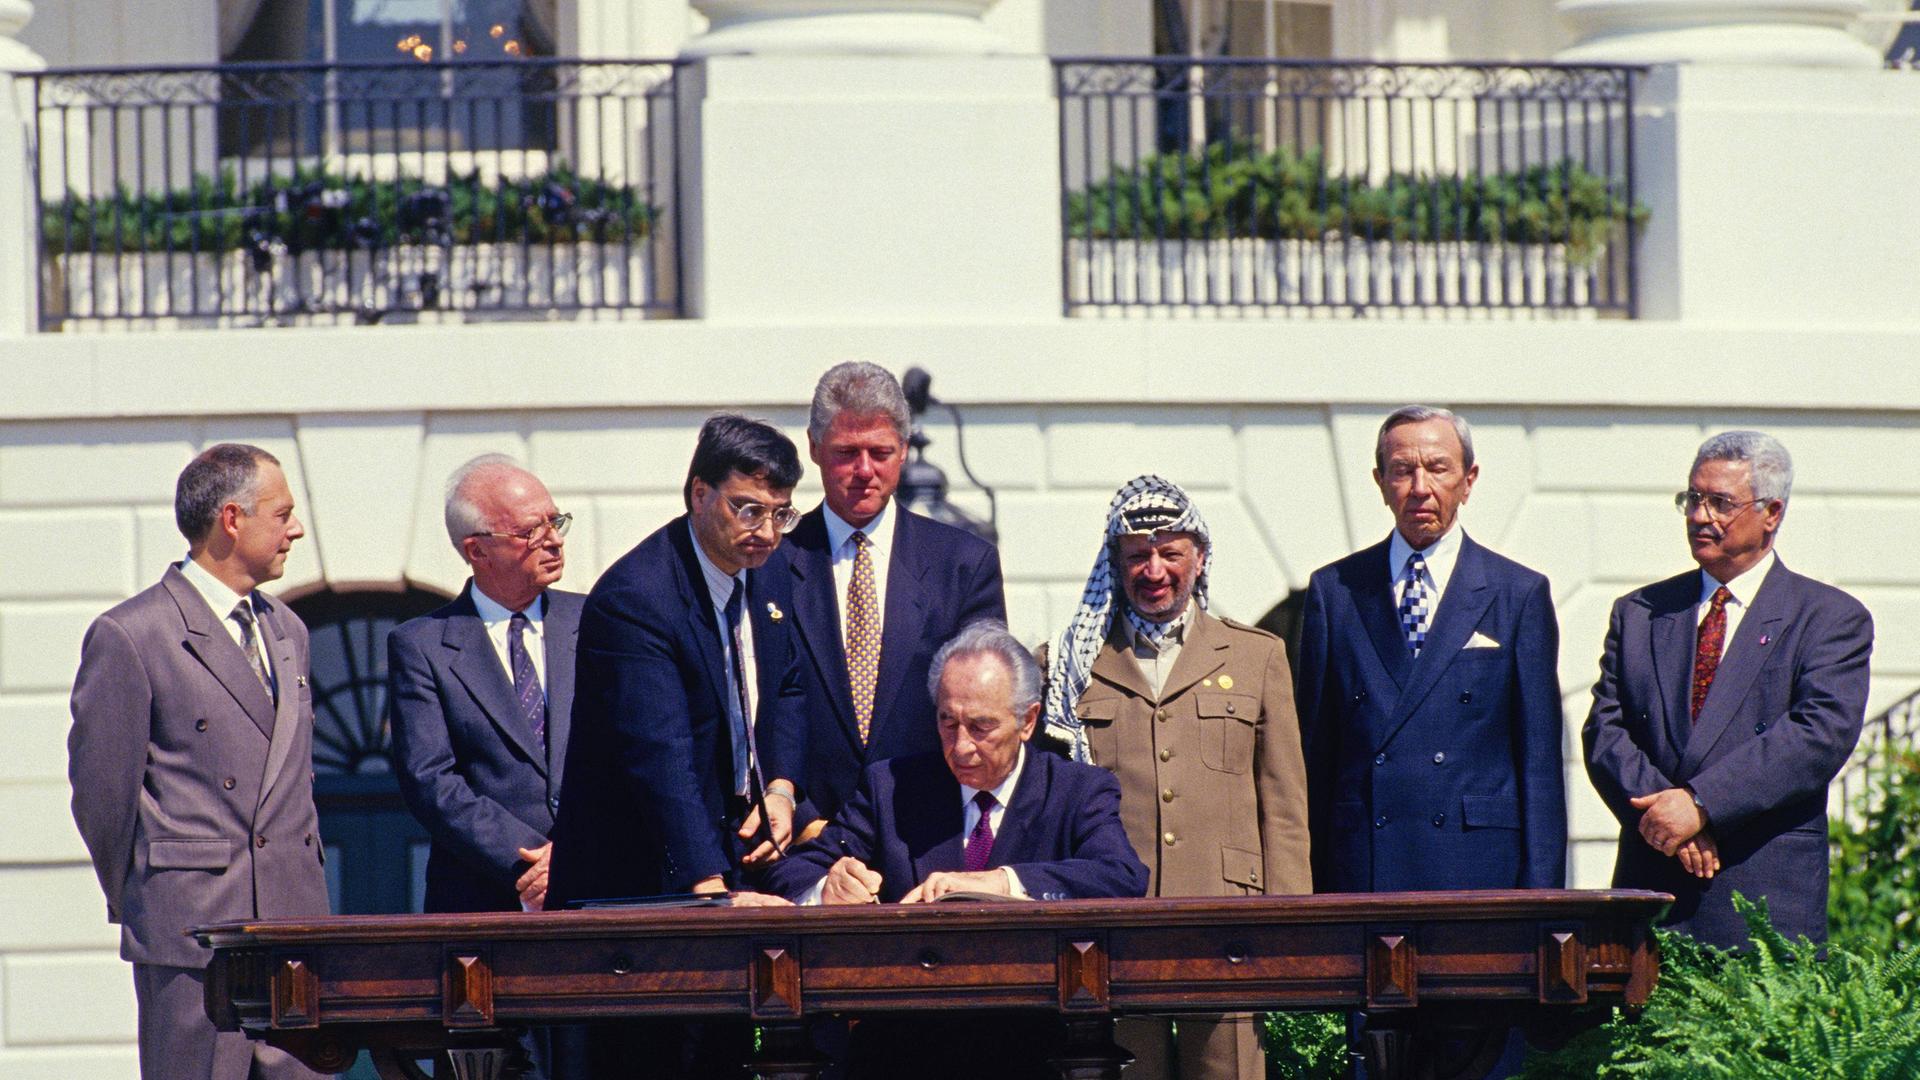 September 13, 1993 - Washington, District of Columbia, United States of America - Minister of Foreign Affairs of Israel Shimon Peres puts his signature on the agreement during the signing ceremony of the historic Israeli-PLO Agreement, known as the Oslo 1 Accord, on the South Lawn of the White House in Washington, DC on September 13, 1993. Pictured, from left to right: From left to right are: Foreign Minister Andrei Kozyrev of Russia; Prime Minister Yitzhak Rabin of Israel; unknown aide; United States President Bill Clinton; Peres; Chairman Yasser Arafat of the Palestine Liberation Organization (PLO); US Secretary of State Warren Christopher; and Arafat aide Mahmoud Abbas..Credit: / CNP Washington United States of America PUBLICATIONxINxGERxSUIxAUTxONLY - ZUMAs152September 13 1993 Washington District of Columbia United States of America Ministers of Foreign Affairs of Israel Shimon Peres Puts His Signature ON The Agreement during The Signing Ceremony of The Historic Israeli PLO Agreement known As The Oslo 1 Accord ON The South Lawn of The White House in Washington DC ON September 13 1993 Pictured from left to Right from left to Right are Foreign Ministers Andrei Kozyrev of Russia Prime Ministers Yitzhak Rabin of Israel Unknown Aide United States President Bill Clinton administration Peres Chairman Yasser Arafat of The Palestine Liberation Organization PLO U.S. Secretary of State Warren Christopher and Arafat Aide Mahmoud Abbas Credit CNP Washington United States of America PUBLICATIONxINxGERxSUIxAUTxONLY ZUMAs152  